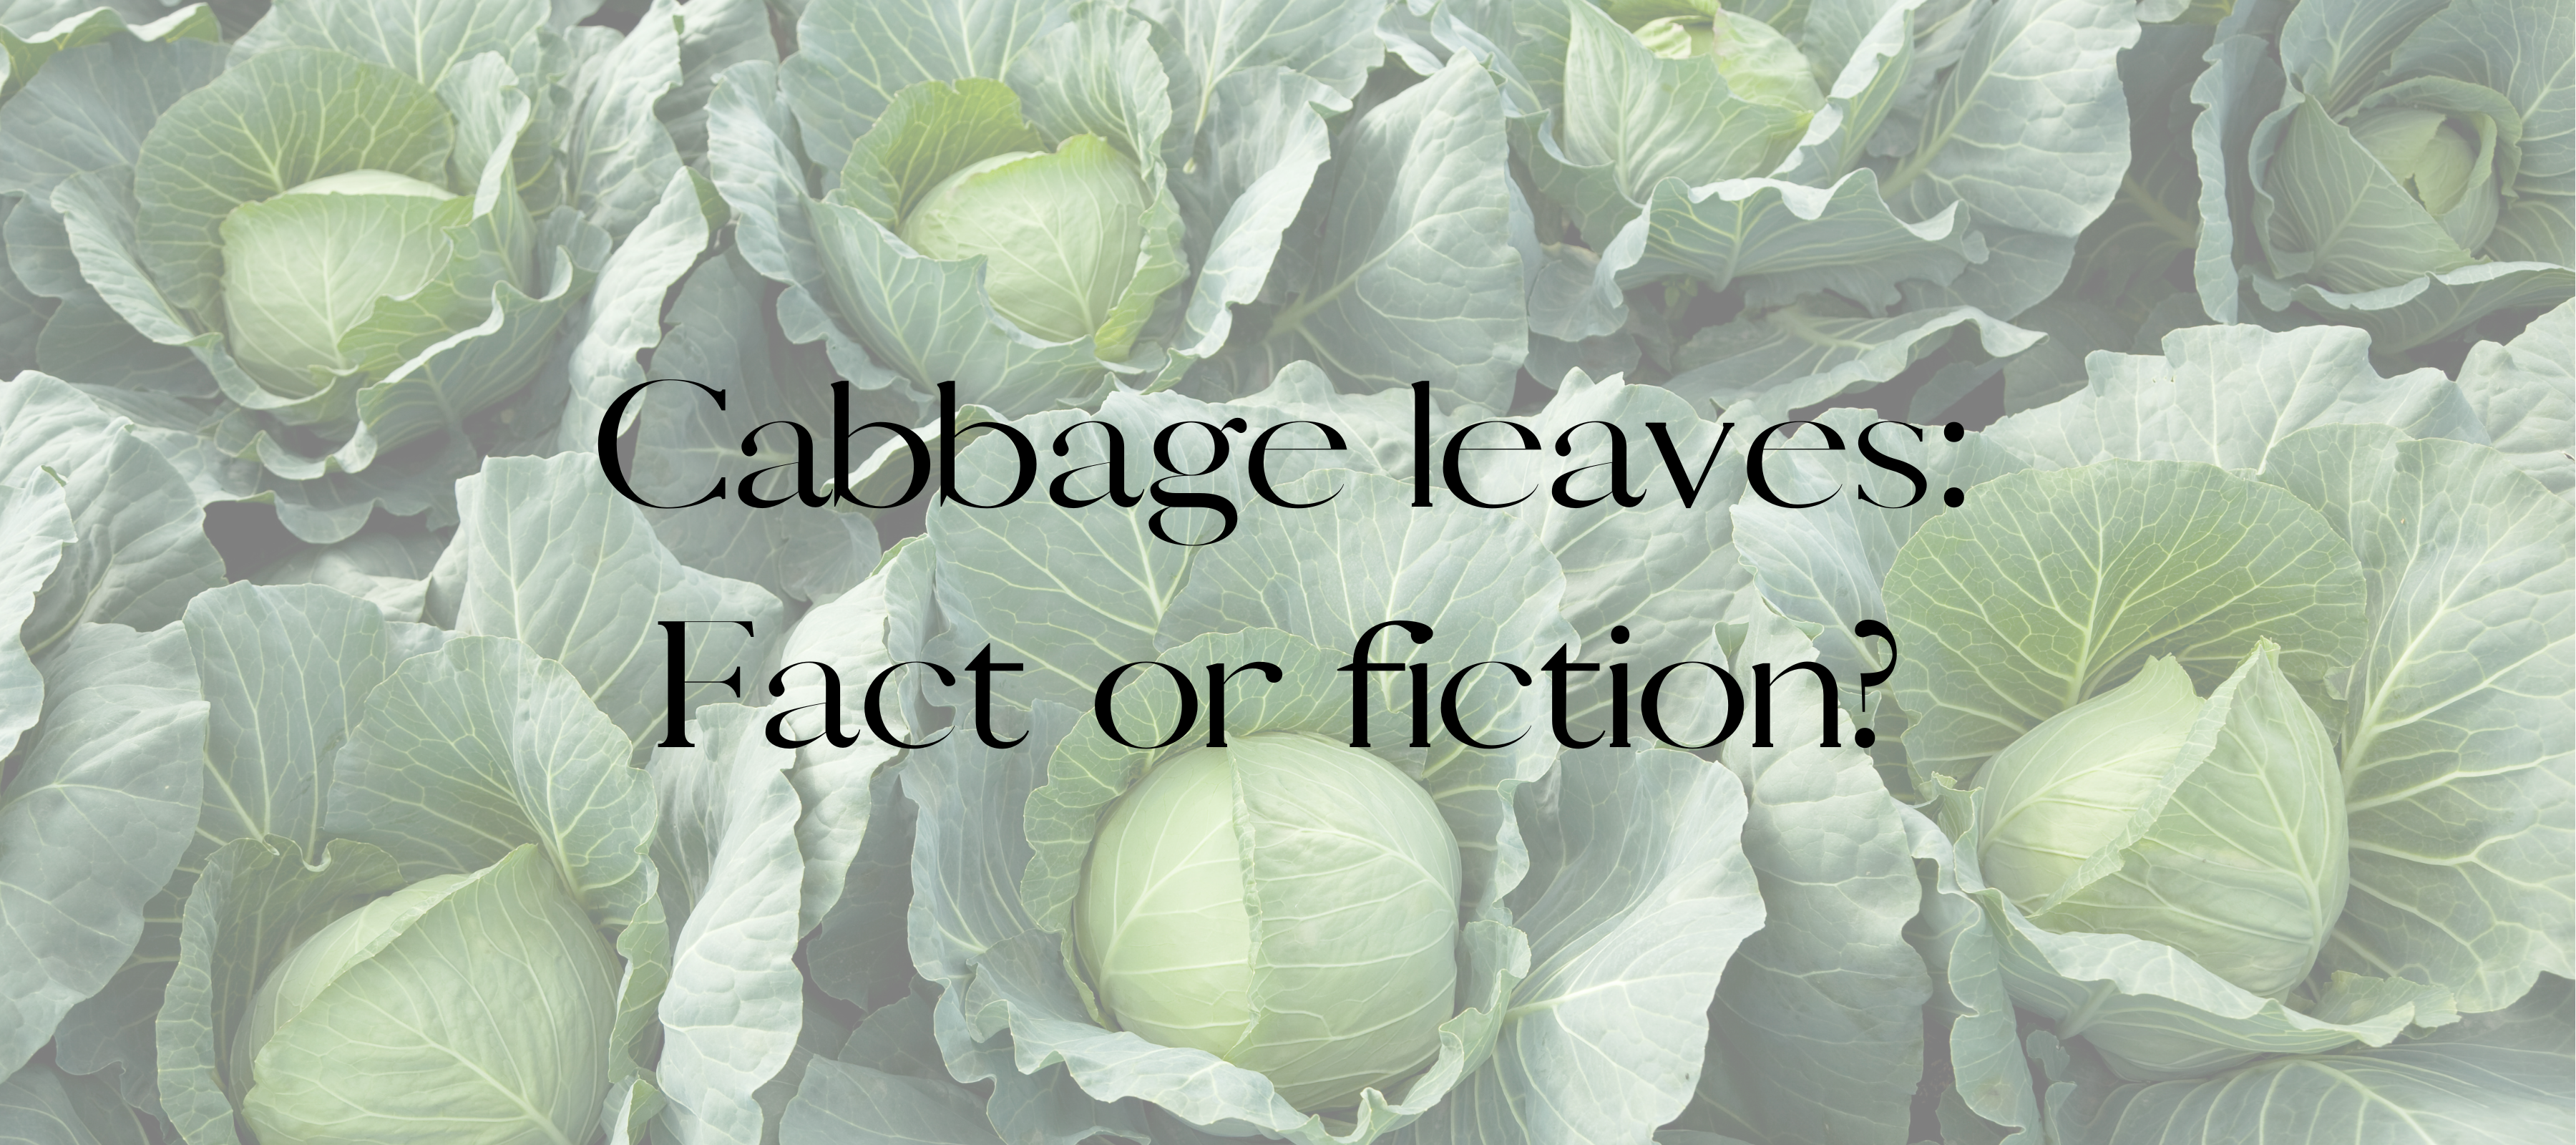 Cabbage leaves: Fact or fiction?